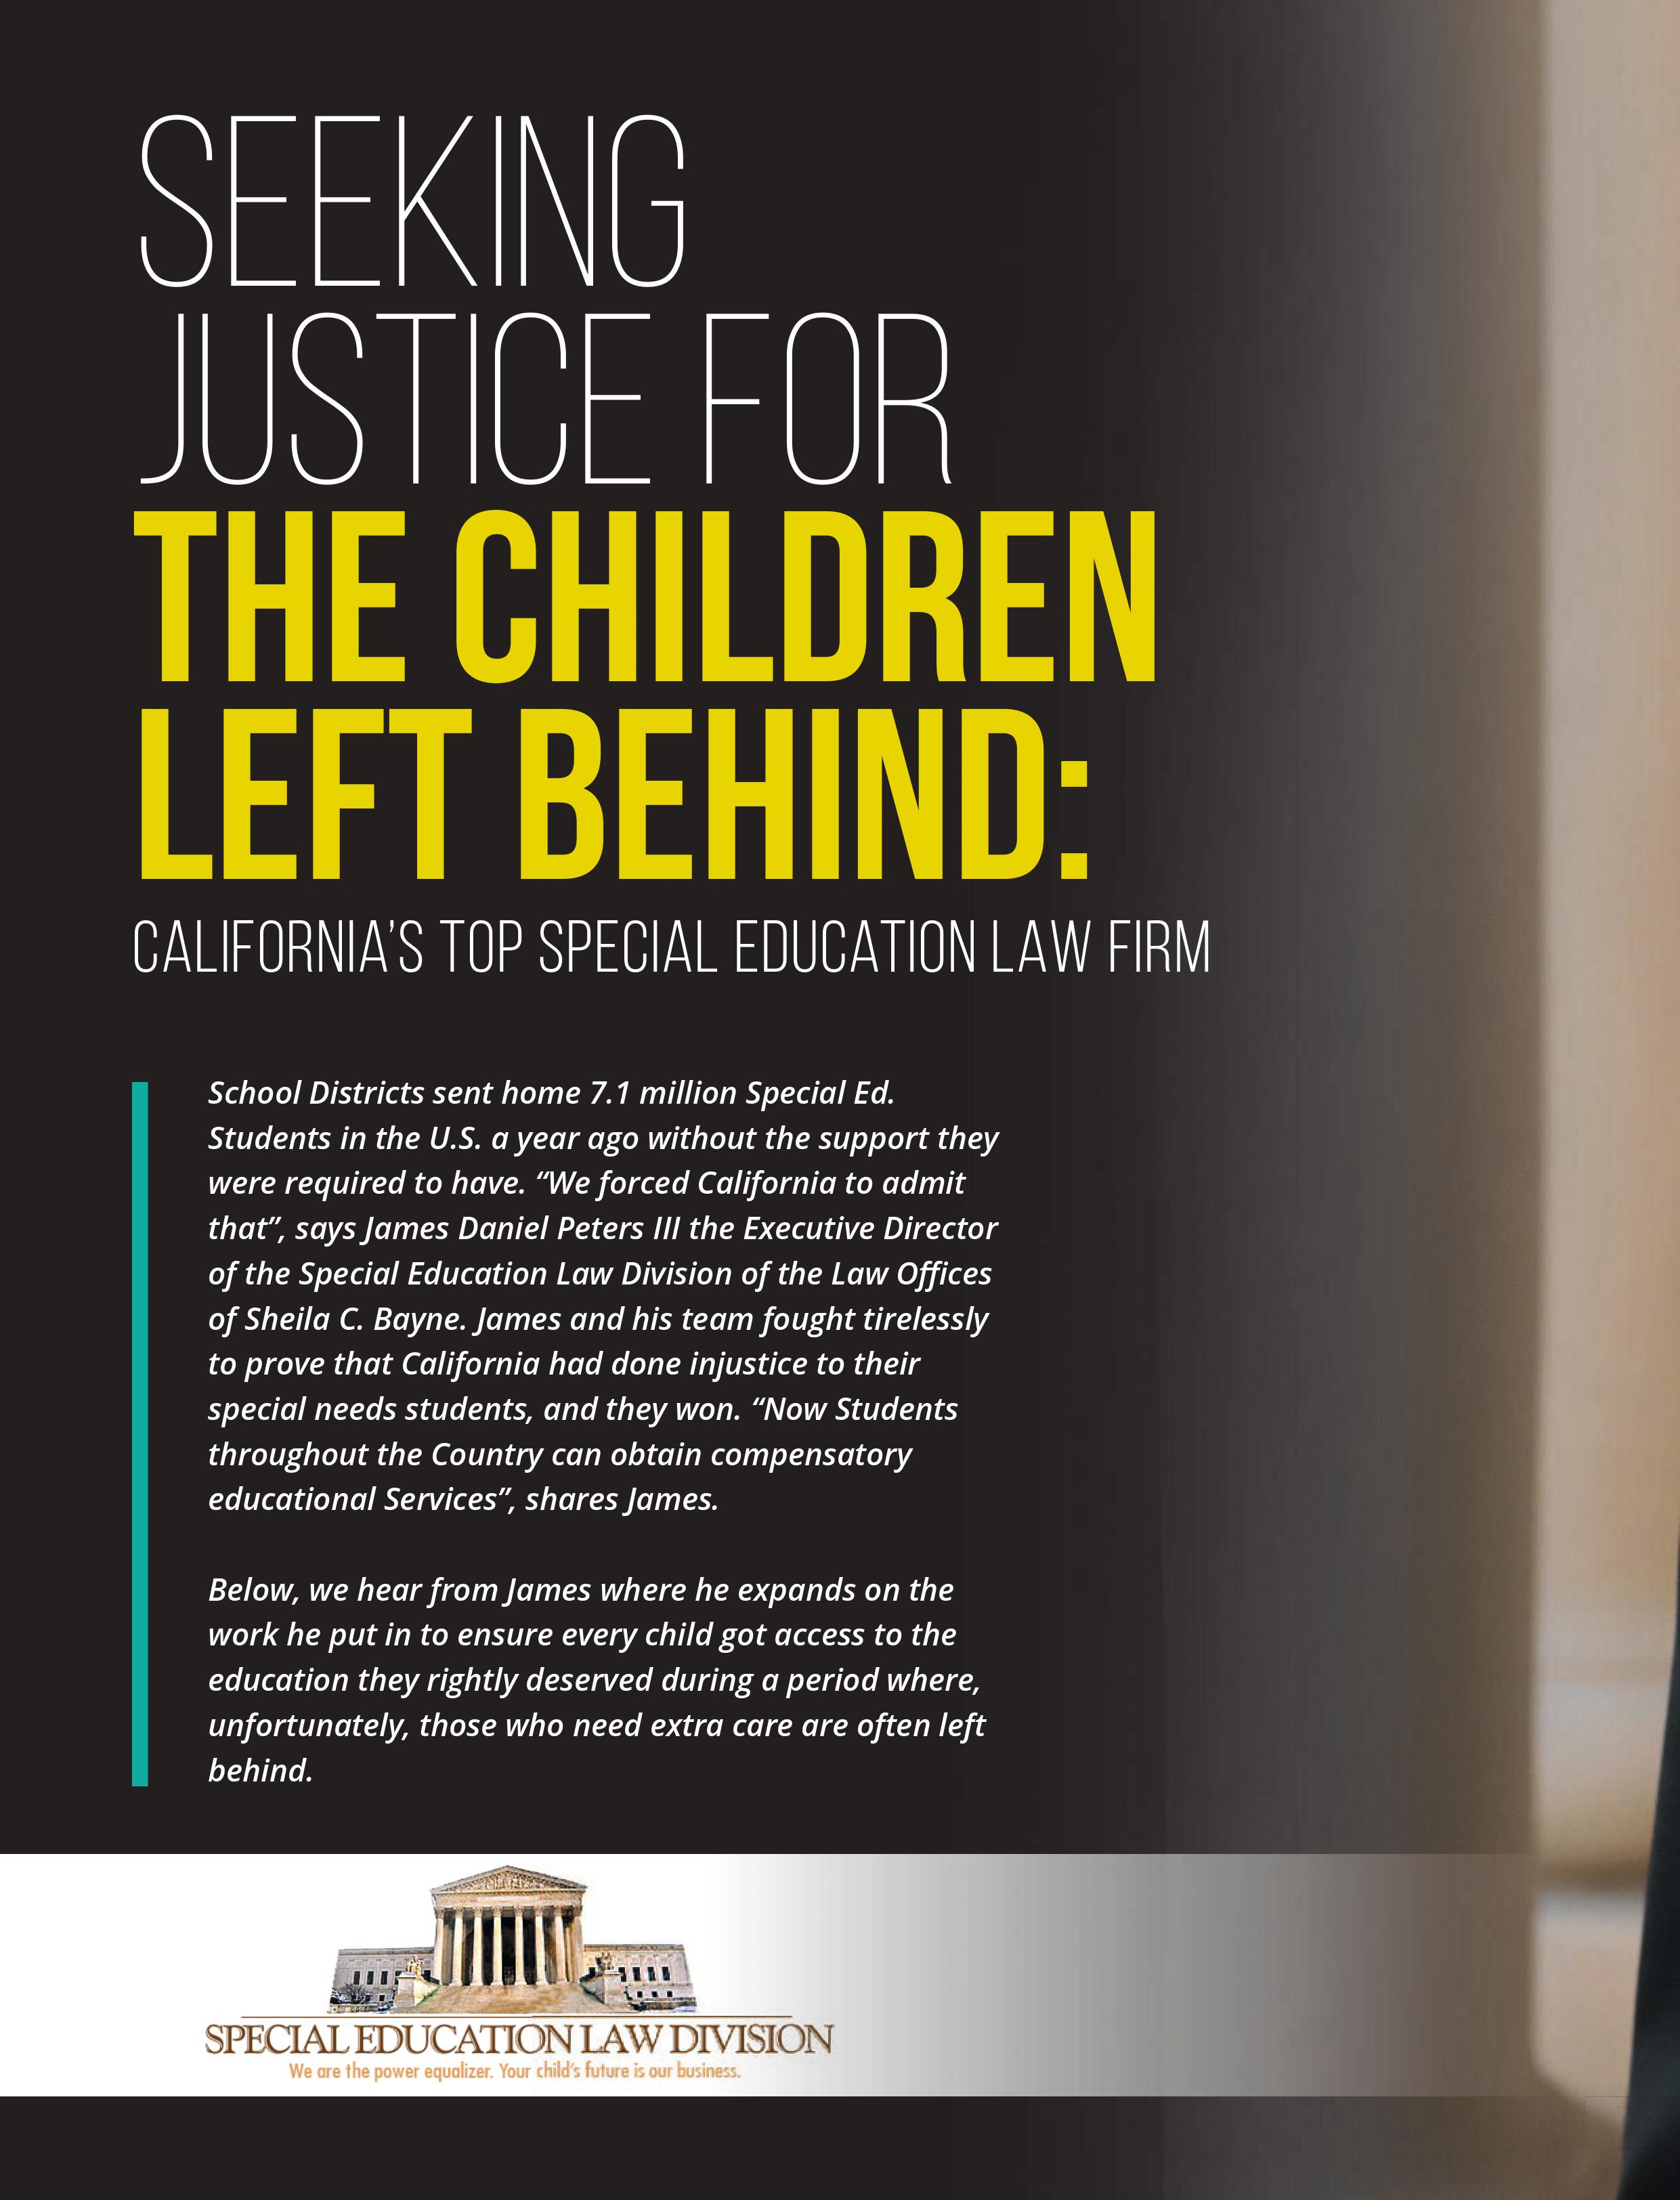 SEEKING JUSTICE FOR THE CHILDREN LEFT BEHIND